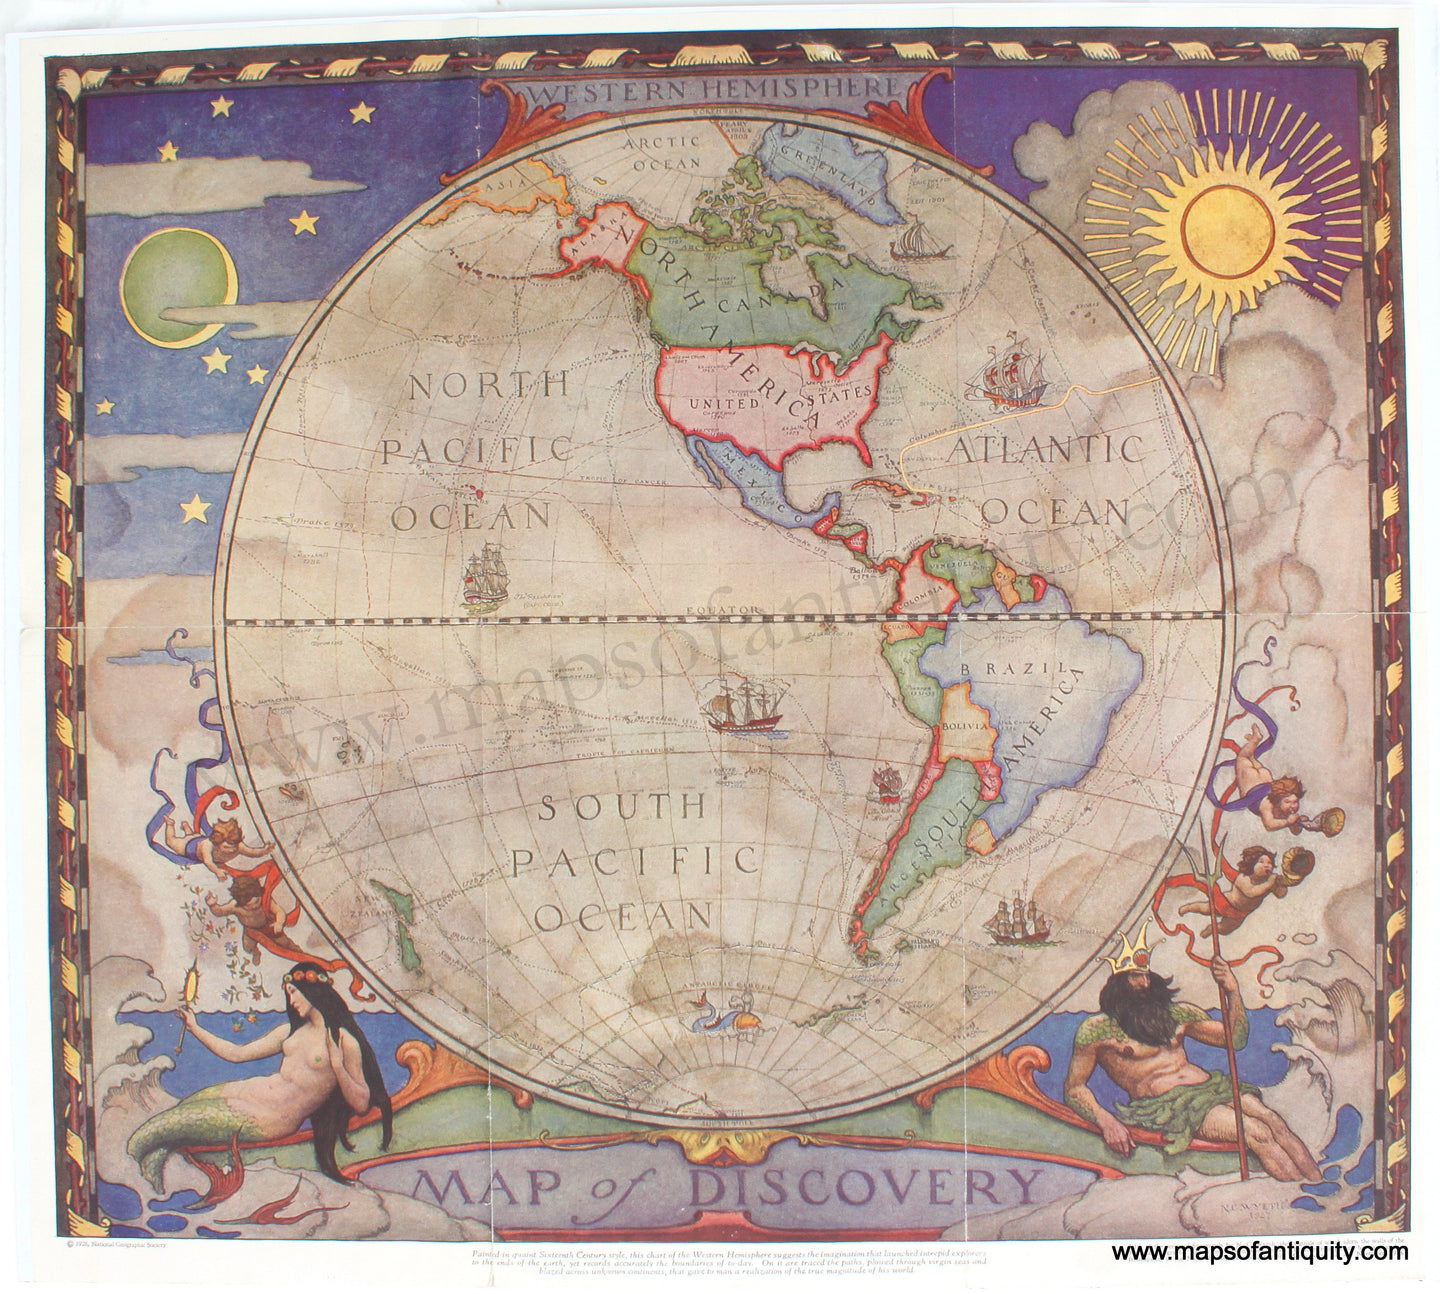 Genuine Antique Printed Color Map-Map of Discovery Western Hemisphere-1928-N.C. Wyeth / National Geographic Society-Maps-Of-Antiquity